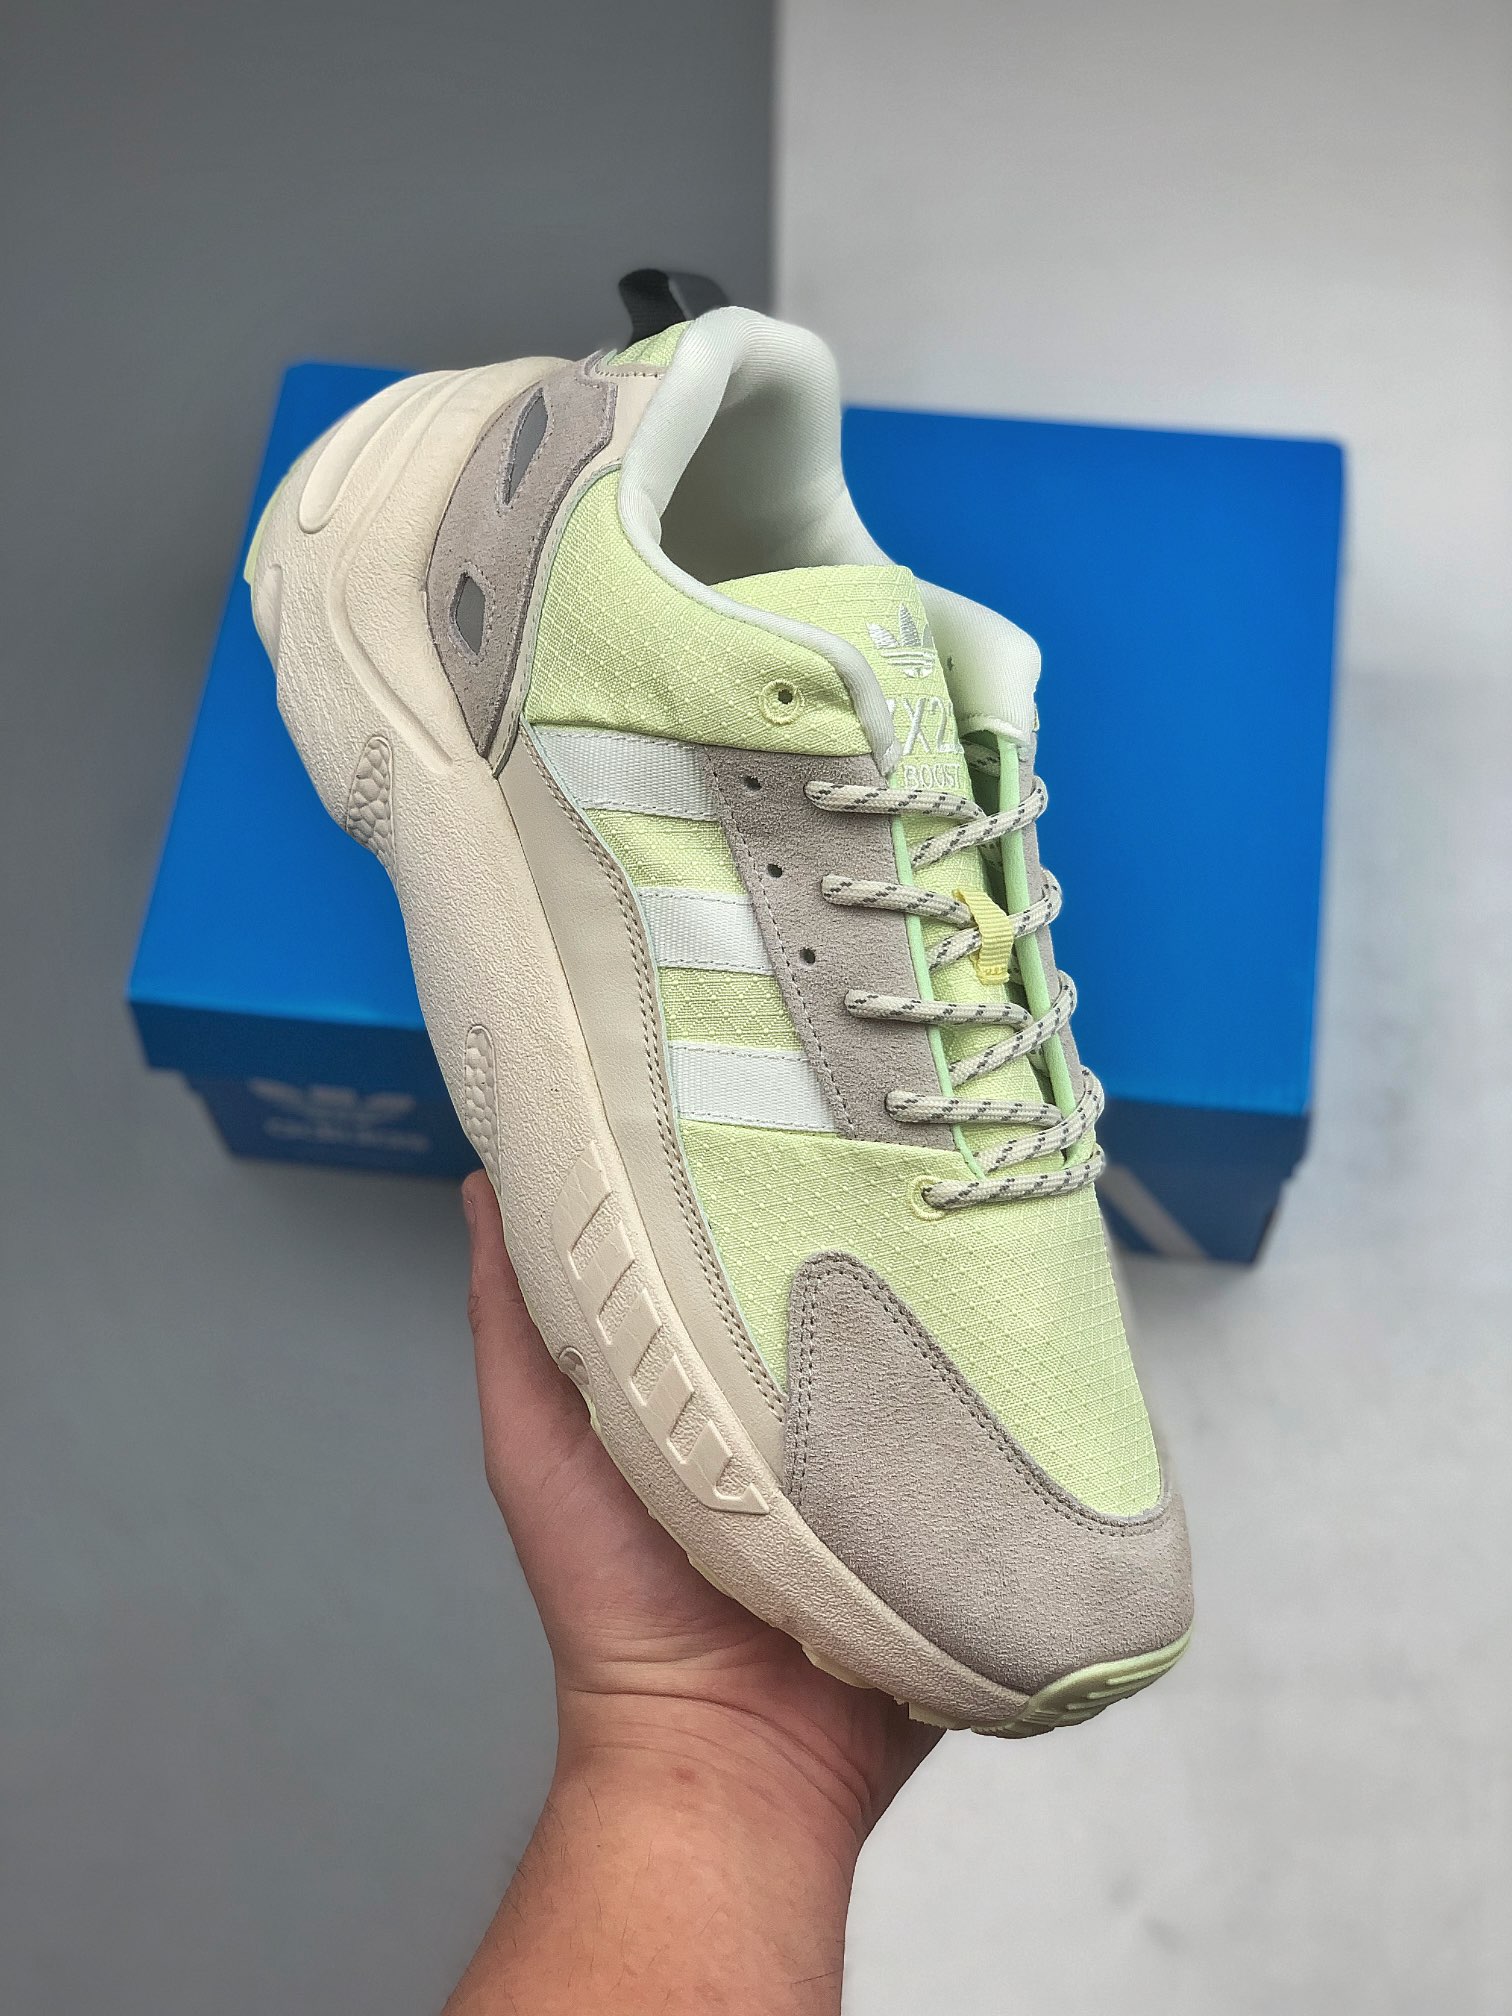 Adidas ZX 22 Boost Sand Yellow Tint GY5271 - Stylish and Comfortable Footwear